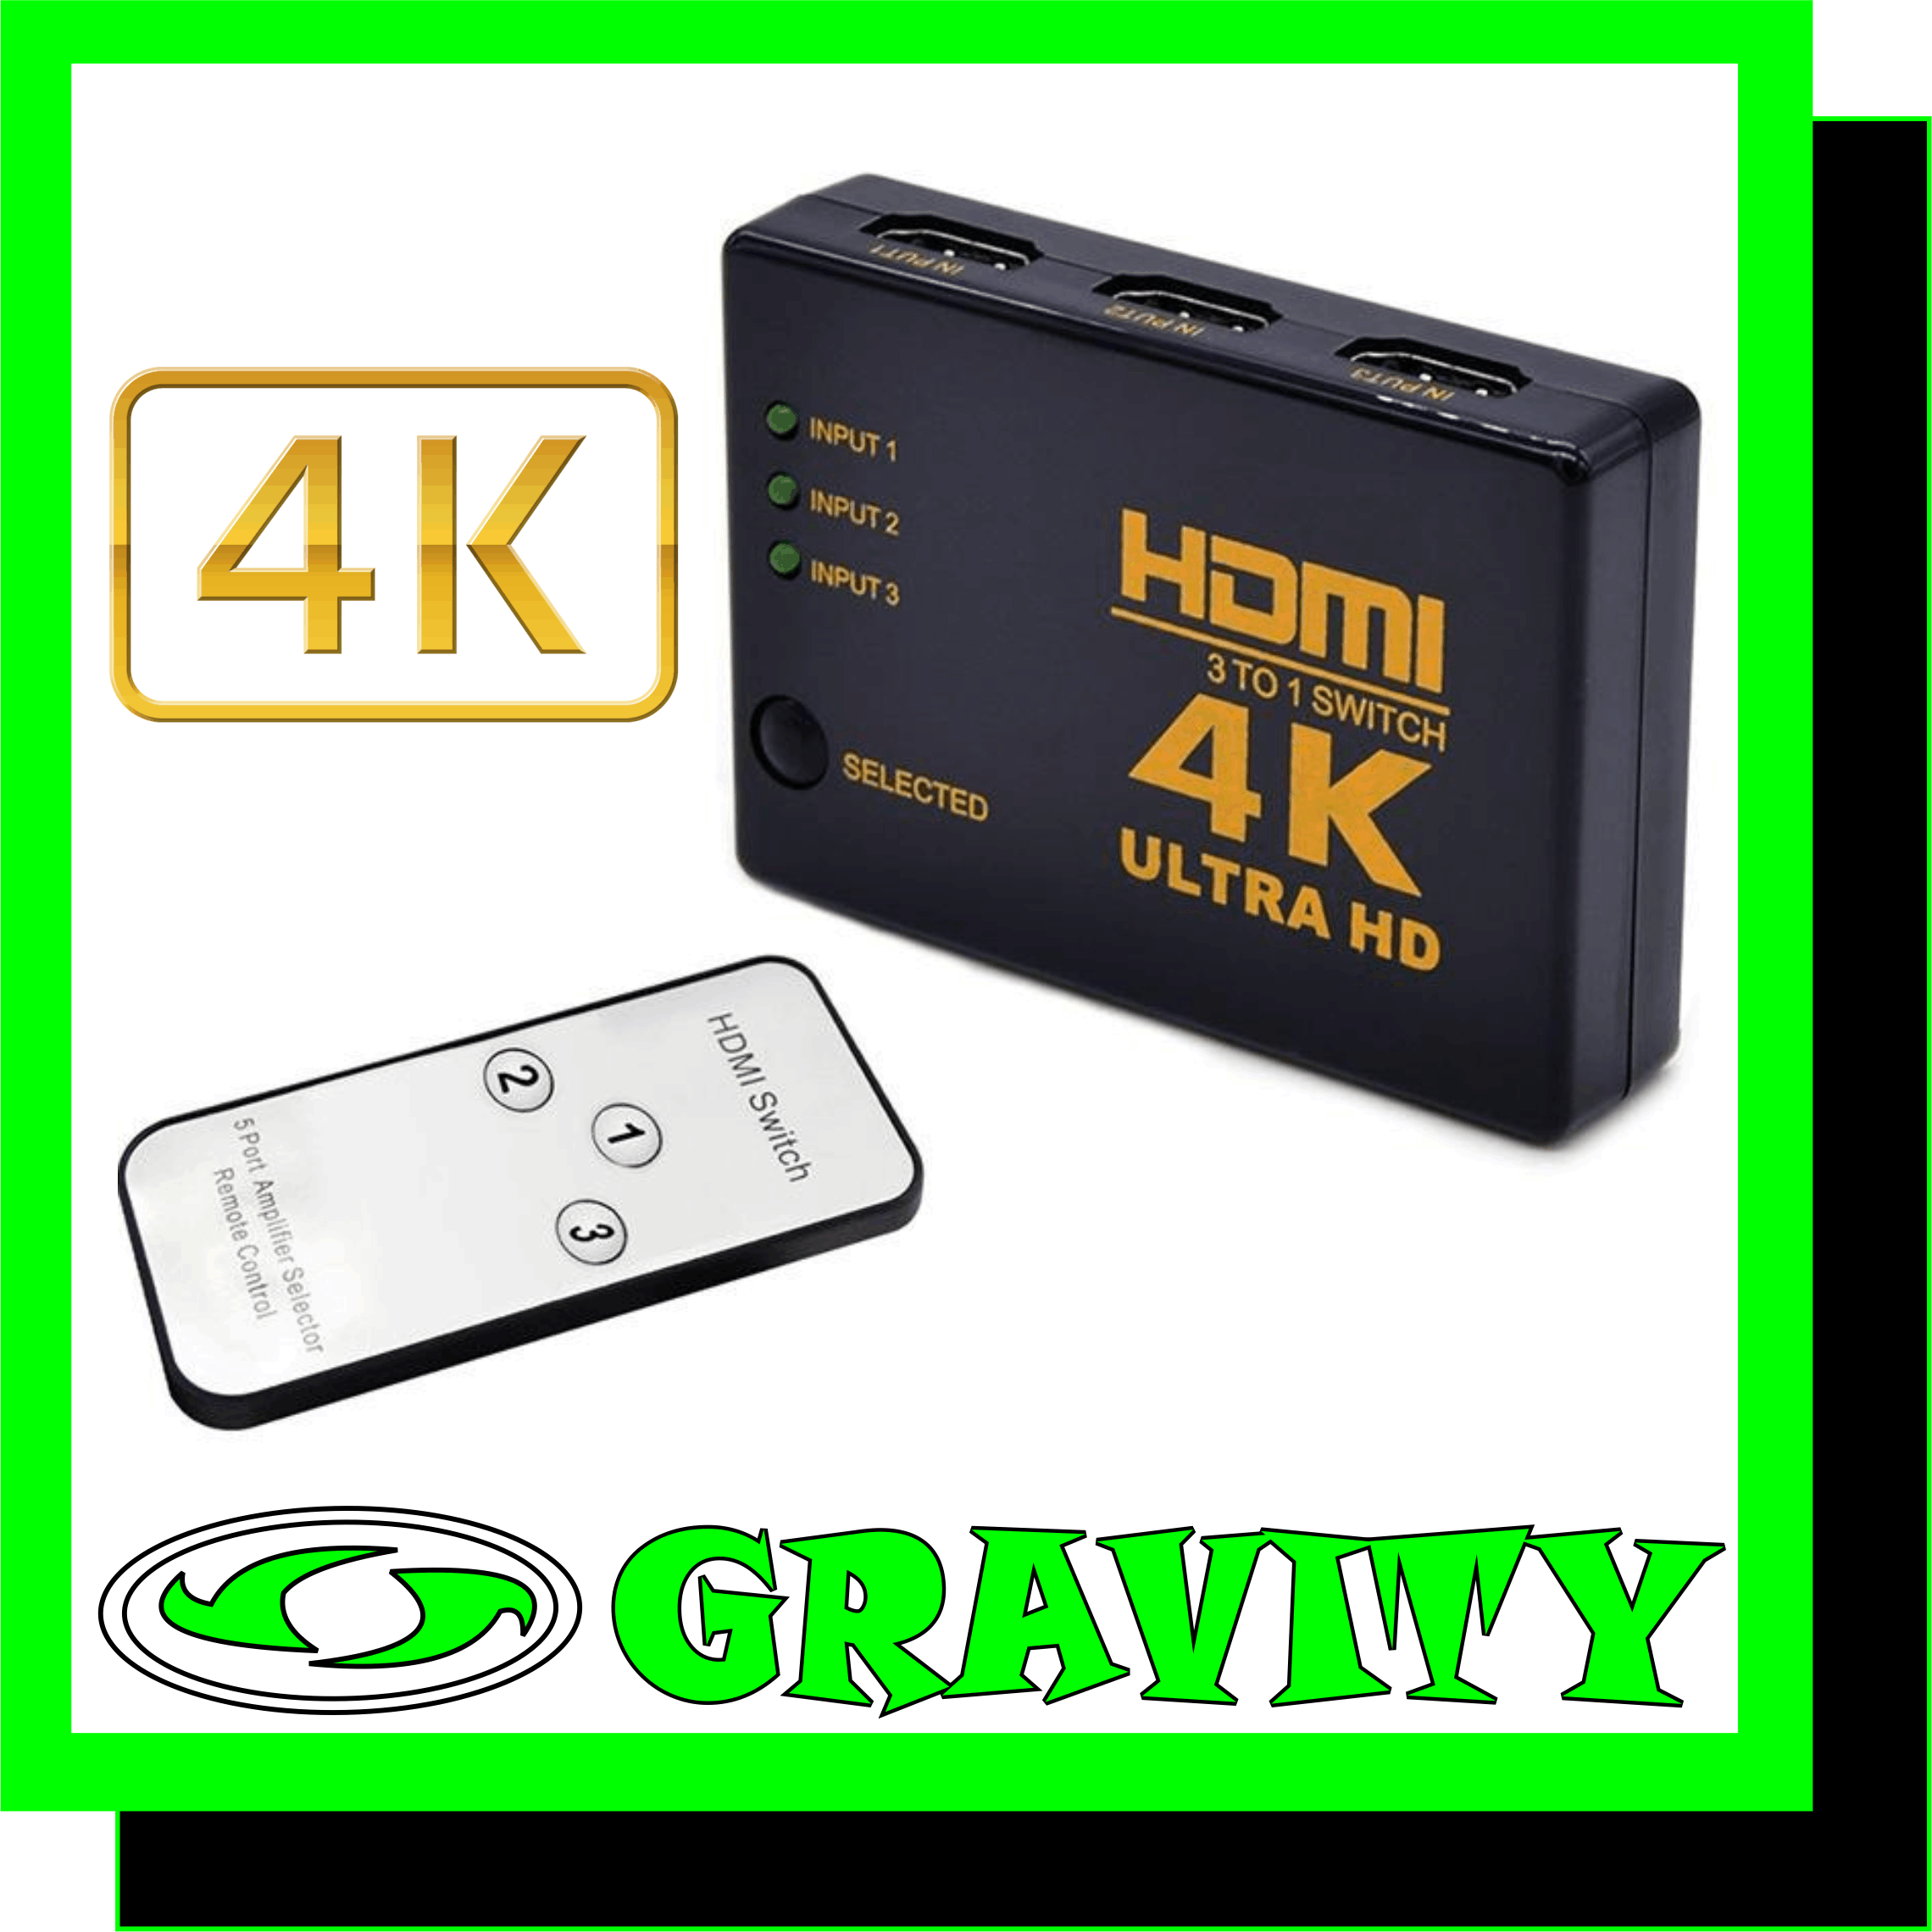 4K*2K 1080p Full HD 3 Port HDMI Switch Switcher 3 IN 1 OUT Hub with Remote Control Splitter Box  This 3 input to 1 output HDMI switcher has the key-press-switching function and has the inteligent function. The 3 input to 1 output HDMI switcher routes high definition 4k*2k video and digital audio from any one of the 3 sources to display unit.